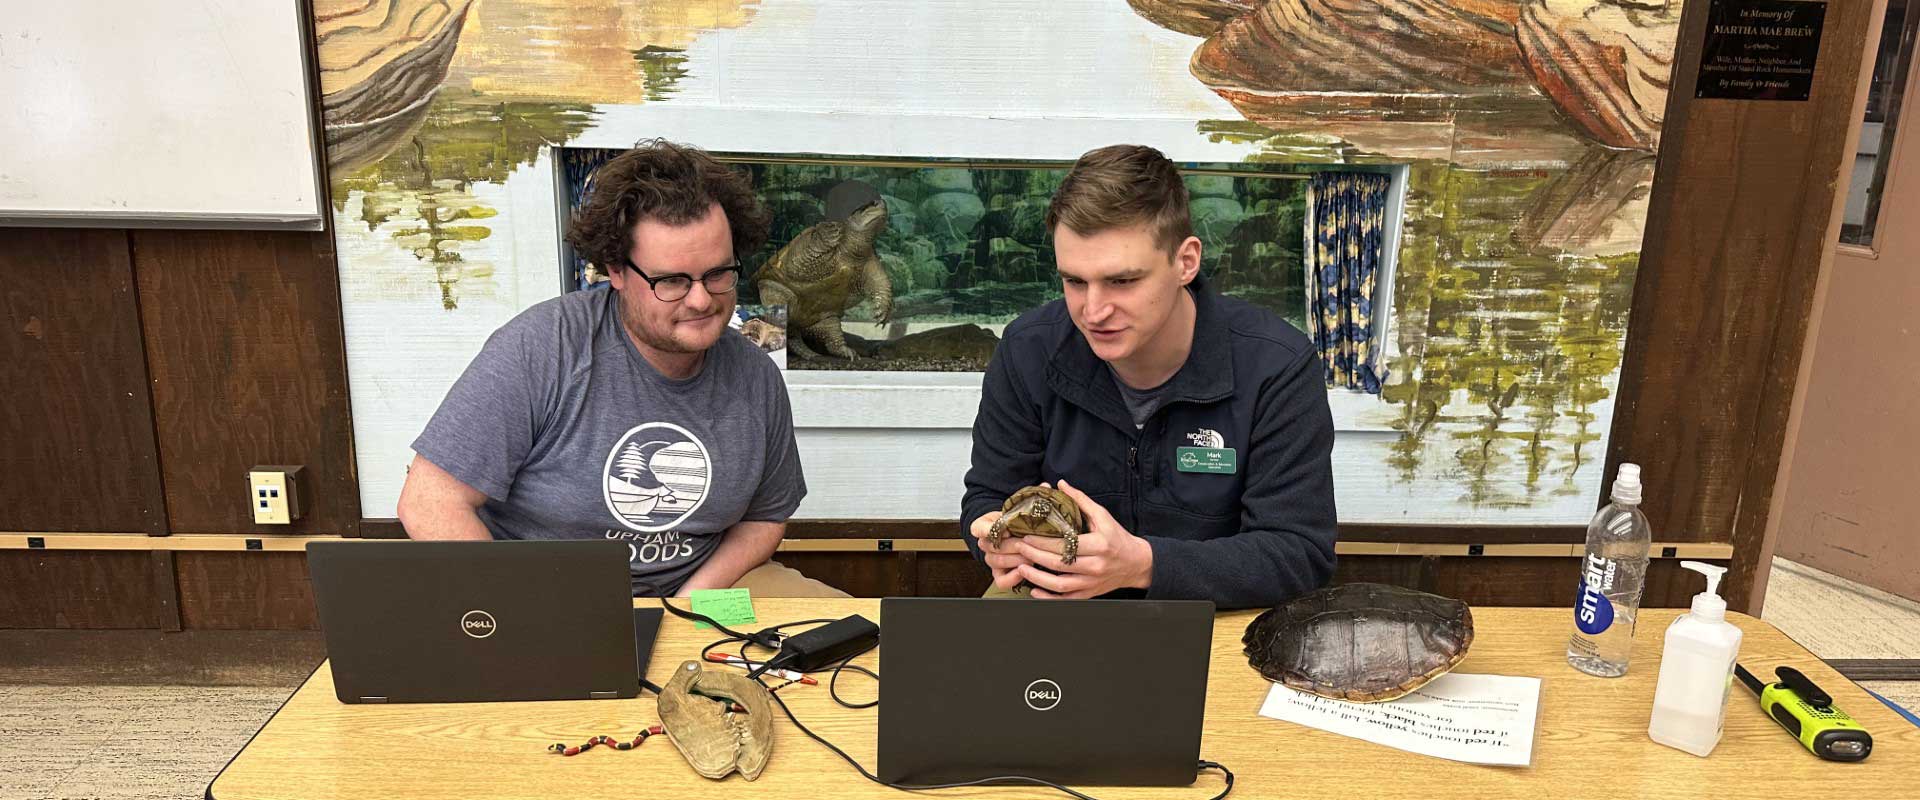 two men on a virtual meeting talking about a turtle that one is holding